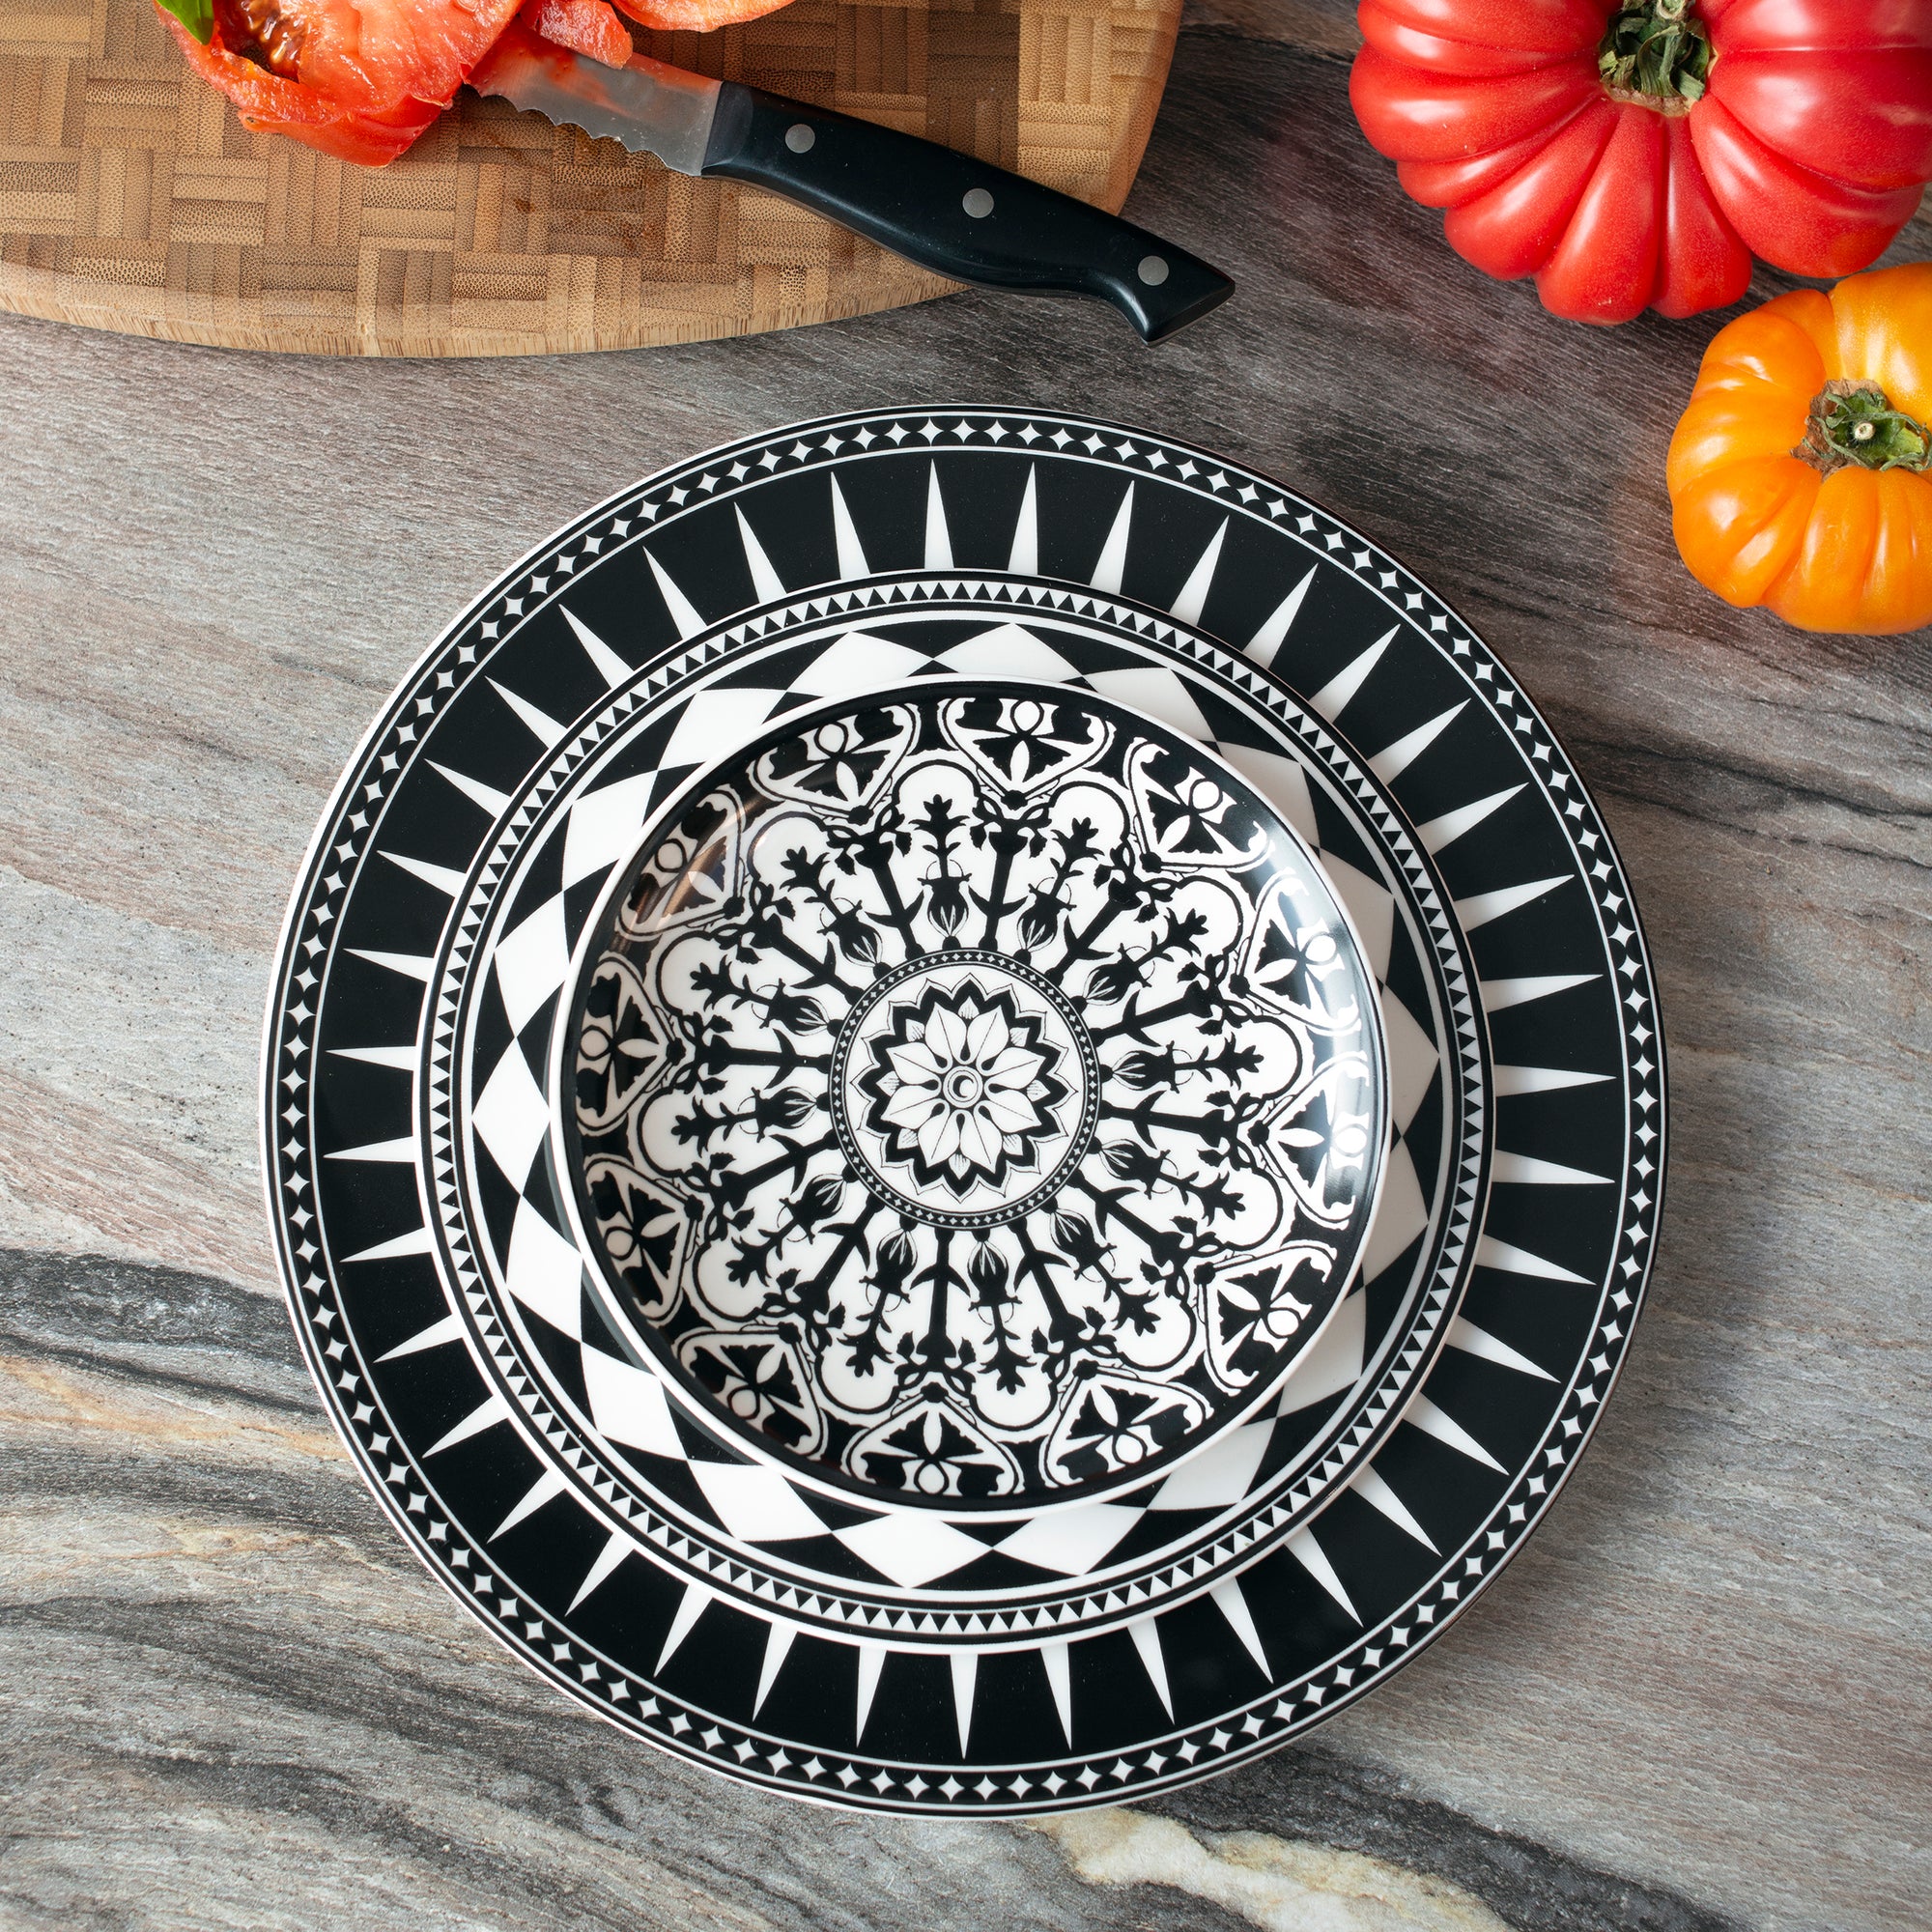 Four round, black porcelain plates with intricate white floral and geometric patterns, arranged in a slightly overlapping layout, against a white background. These heirloom-quality Casablanca Small Plates from Caskata Artisanal Home are as stylish as they are timeless.